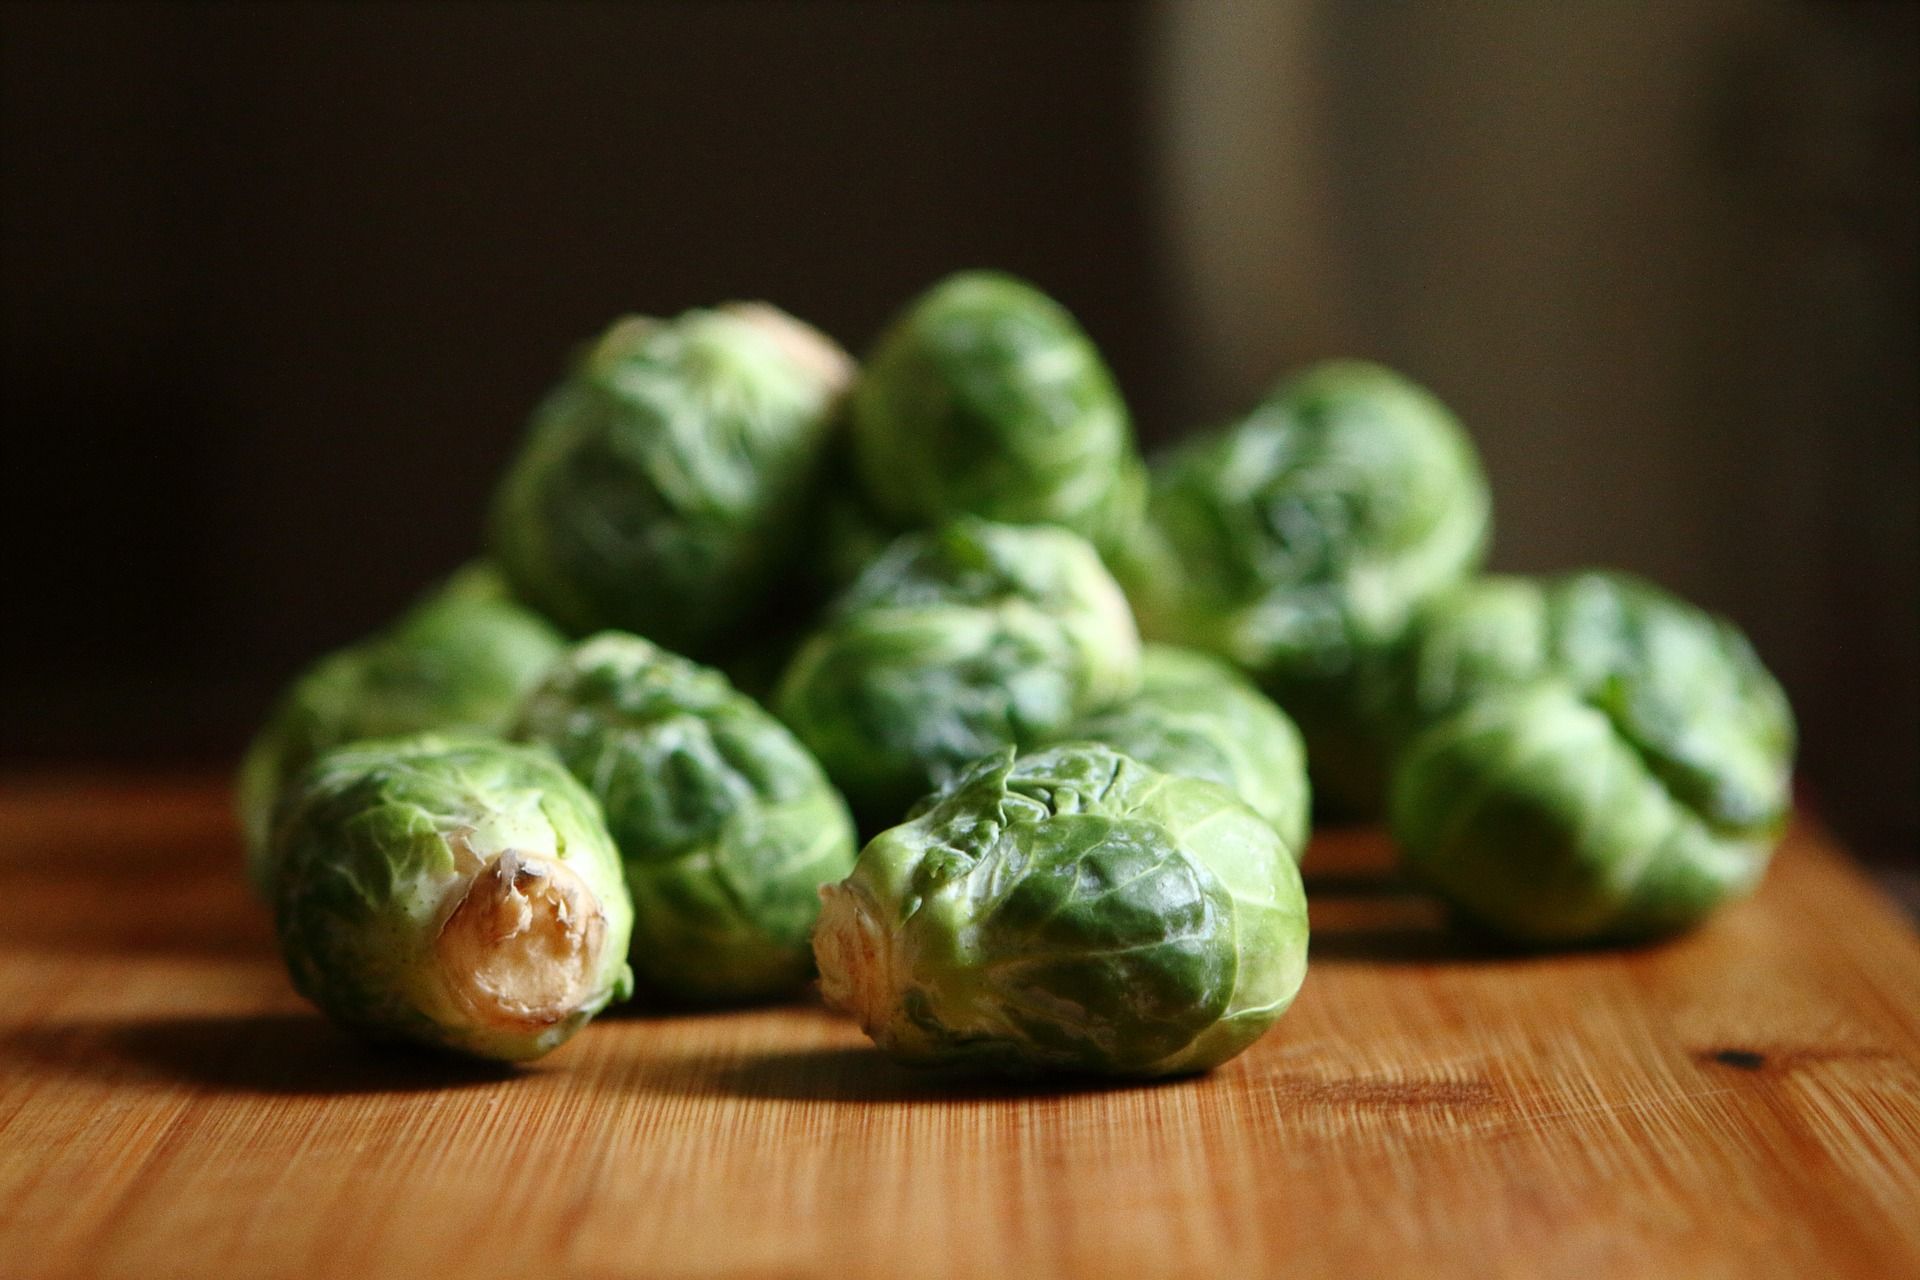 Veg of the Month: Brussels Sprouts